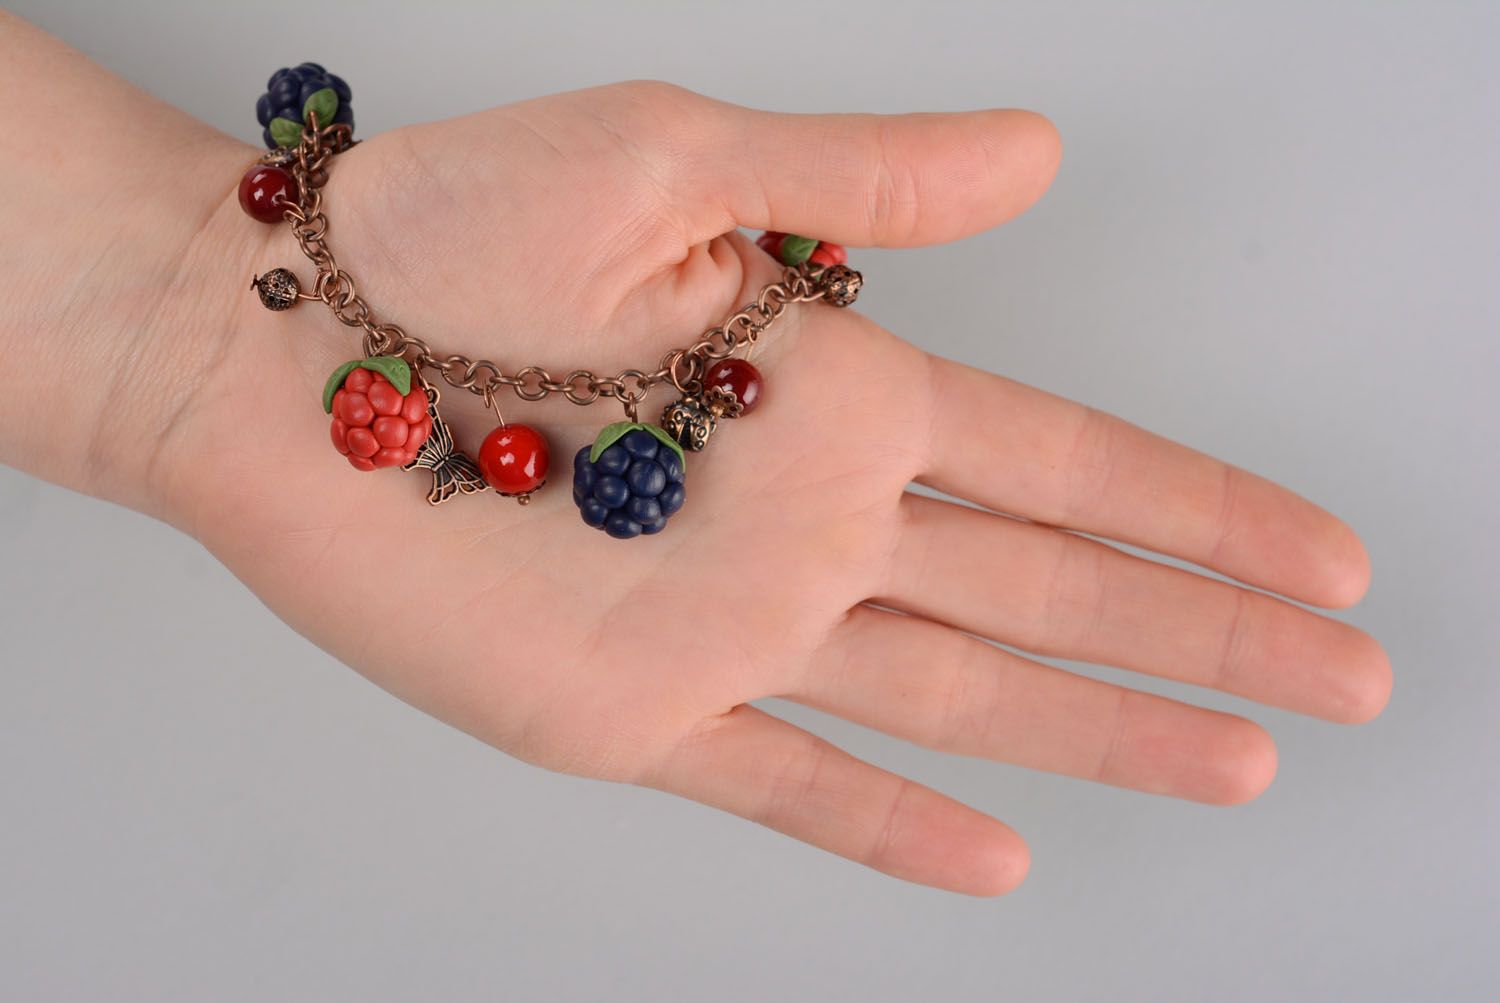 Plastic bracelet with charms in the shape of berries photo 5